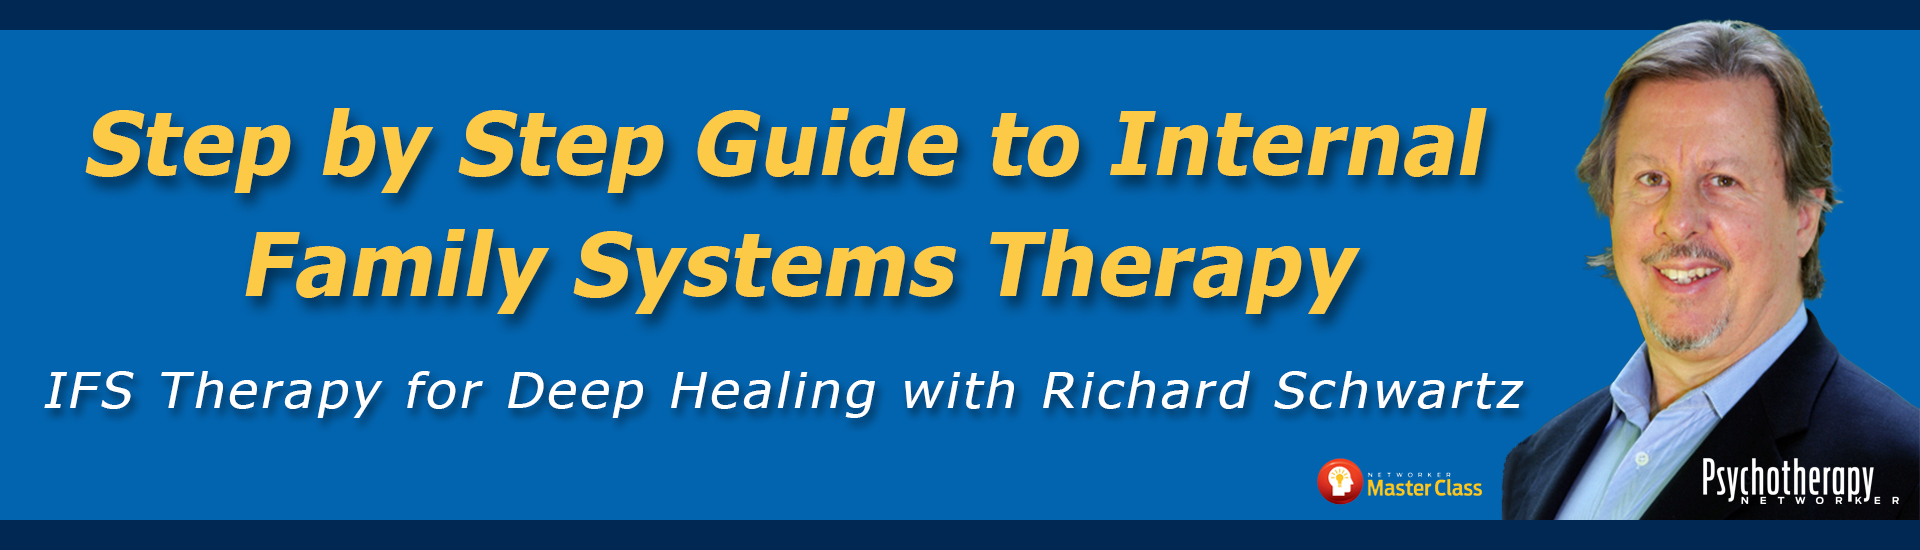 Step by Step Guide to Internal Family Systems Therapy: IFS Therapy for Deep Healing with Richard Schwartz